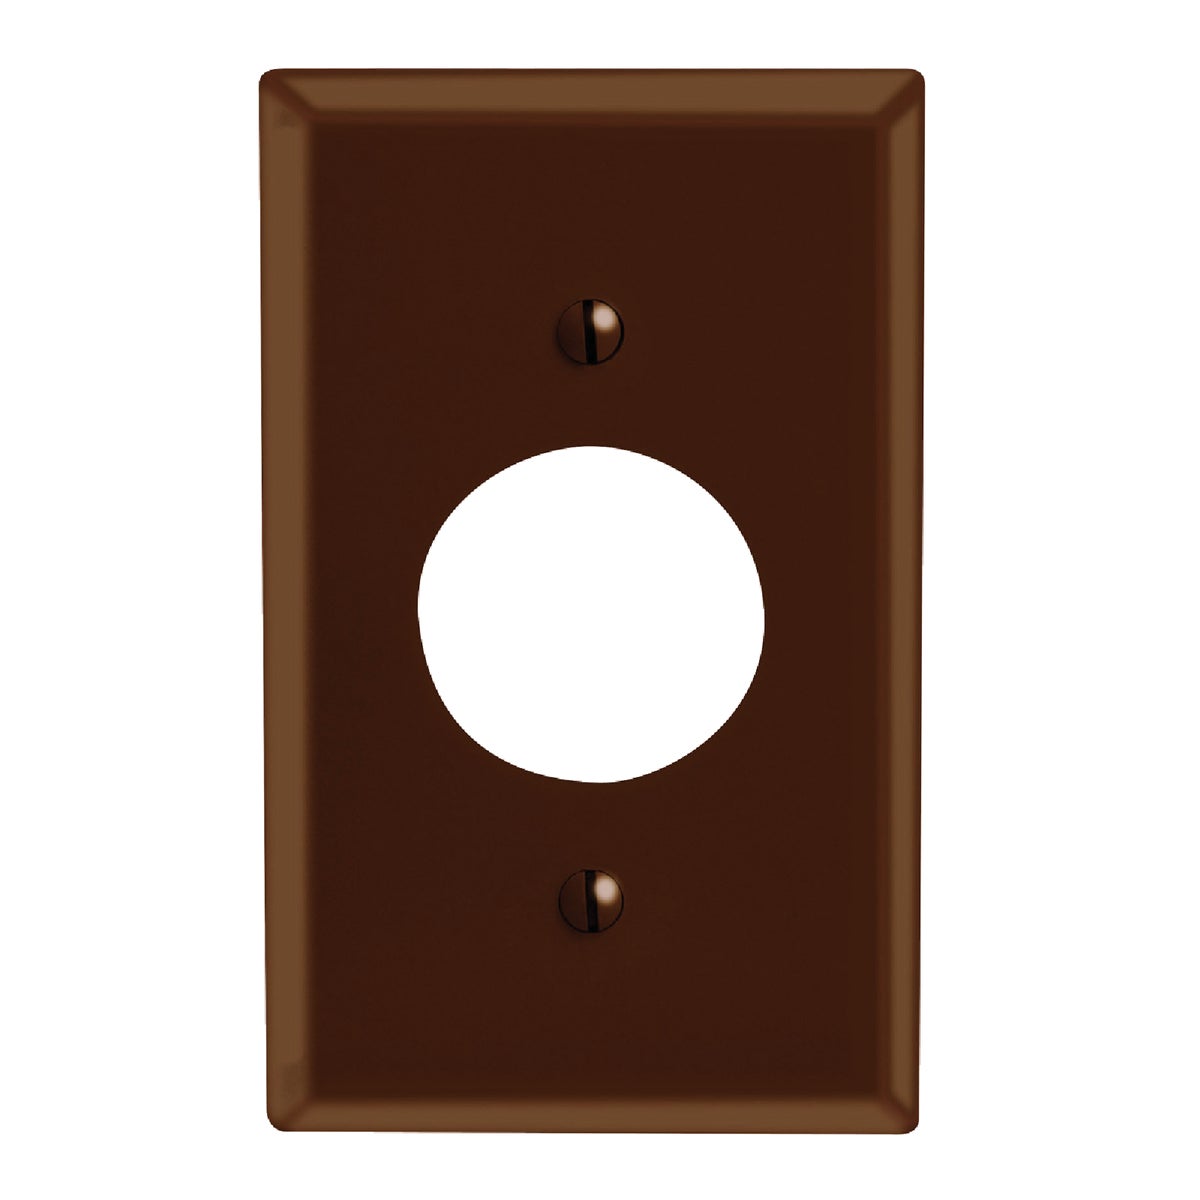 Item 509221, Smooth plastic, standard size single outlet wall plate. Durable.